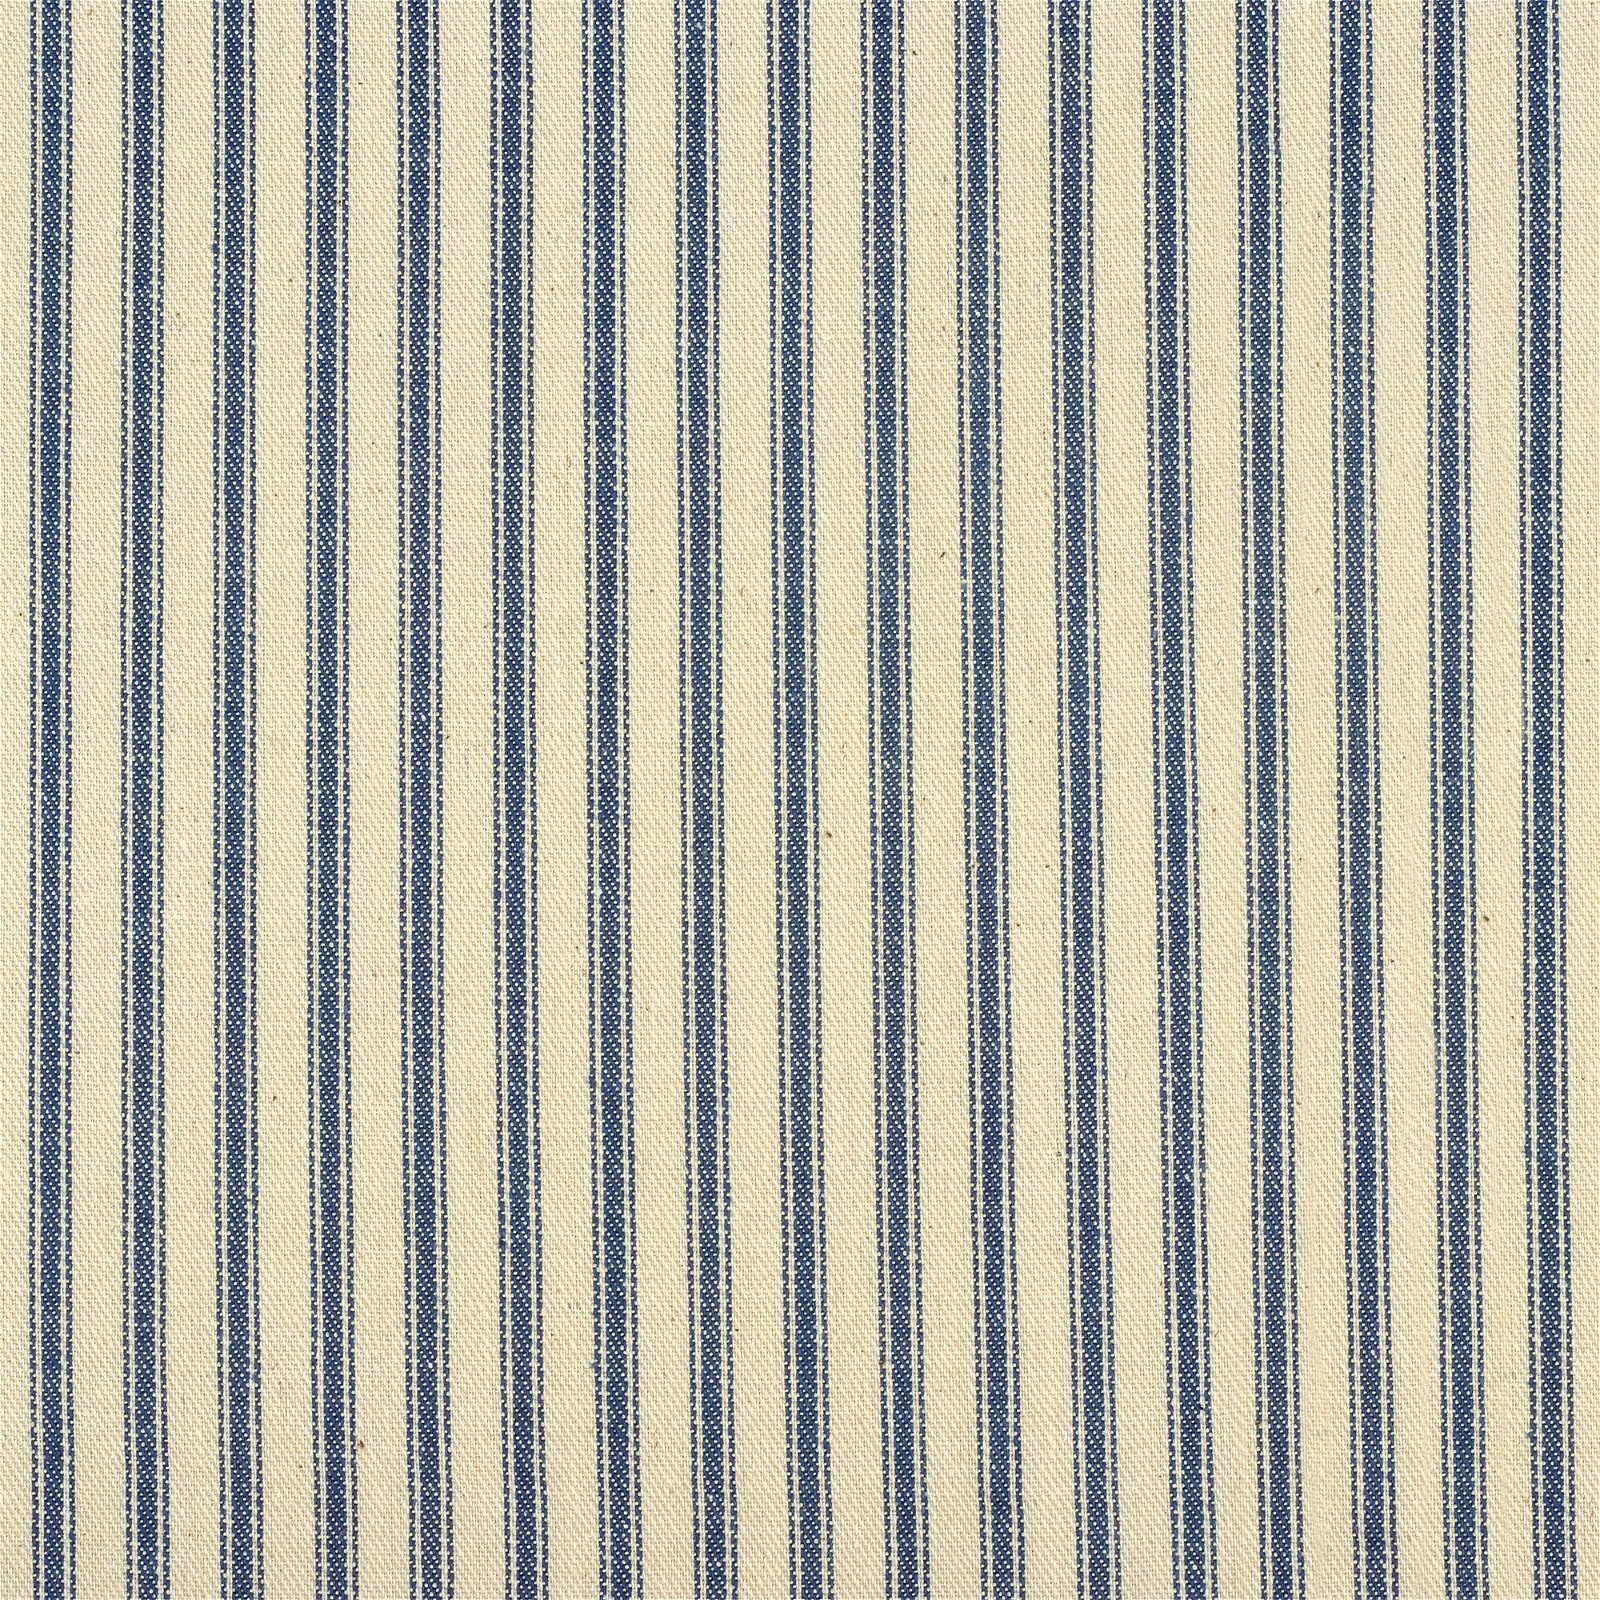 Blue Stripe Cotton Duck Ticking Fabric * Primitive Vertical Blue Striped  Fabric Sold By The Yard - Kittredge Mercantile